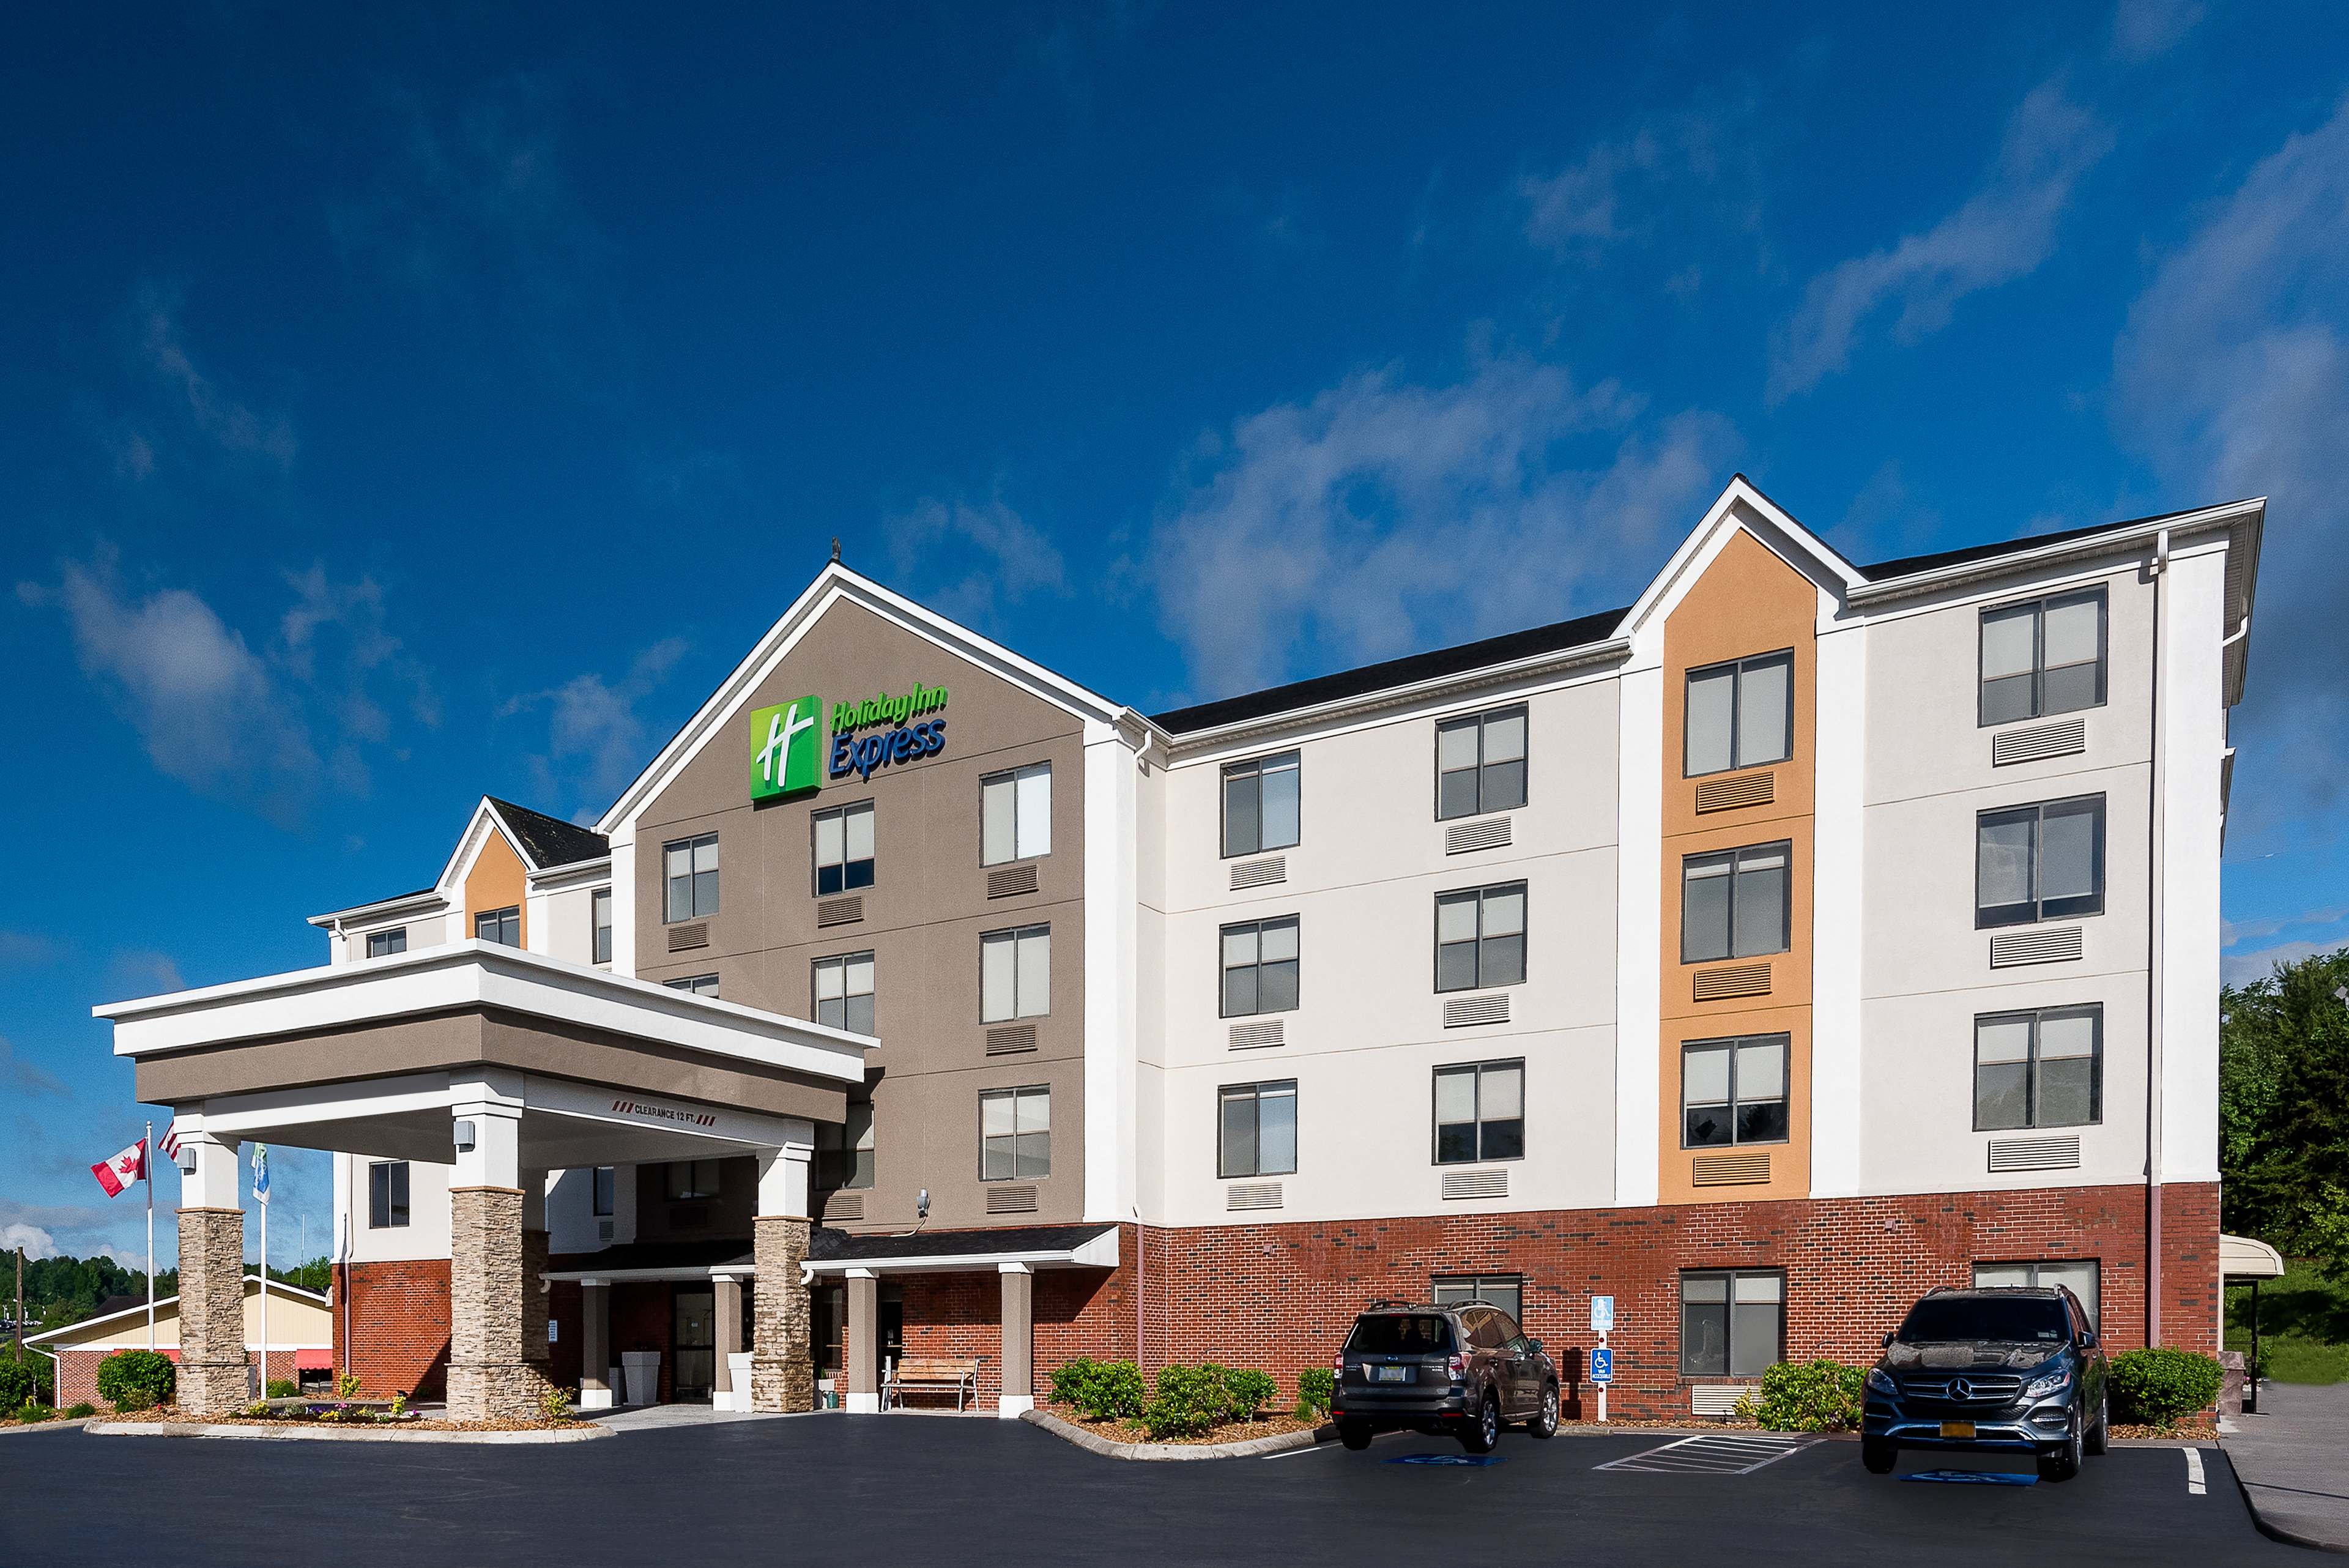 Welcome to the newly renovated Holiday Inn Express Hillsville!